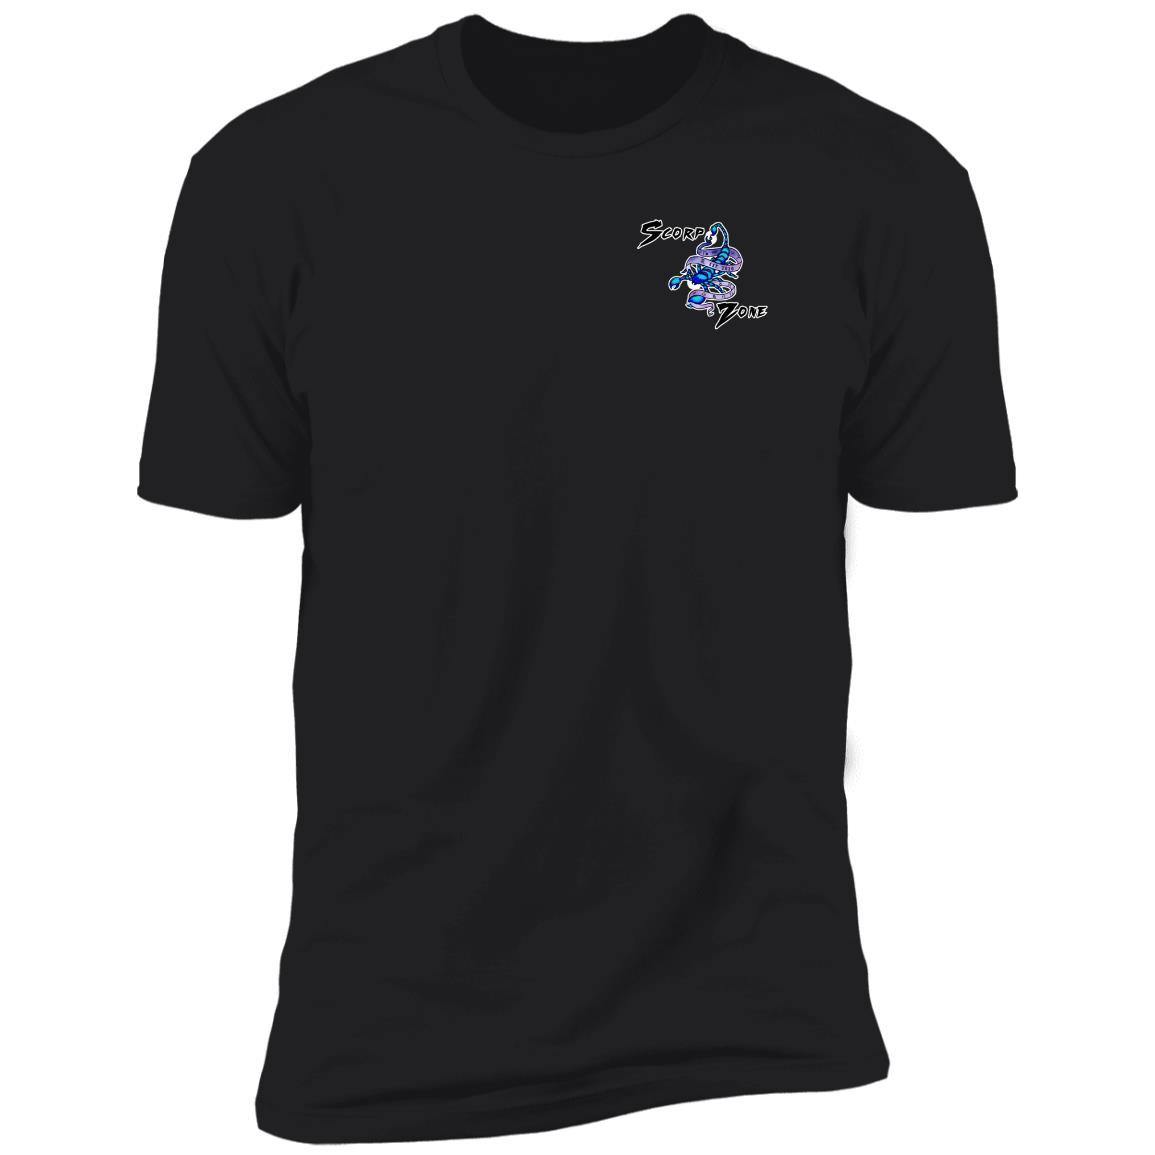 Capricorn Design On Back and Small Scorp Zone Logo On Front - Premium Short Sleeve T-Shirt - ScorpZone